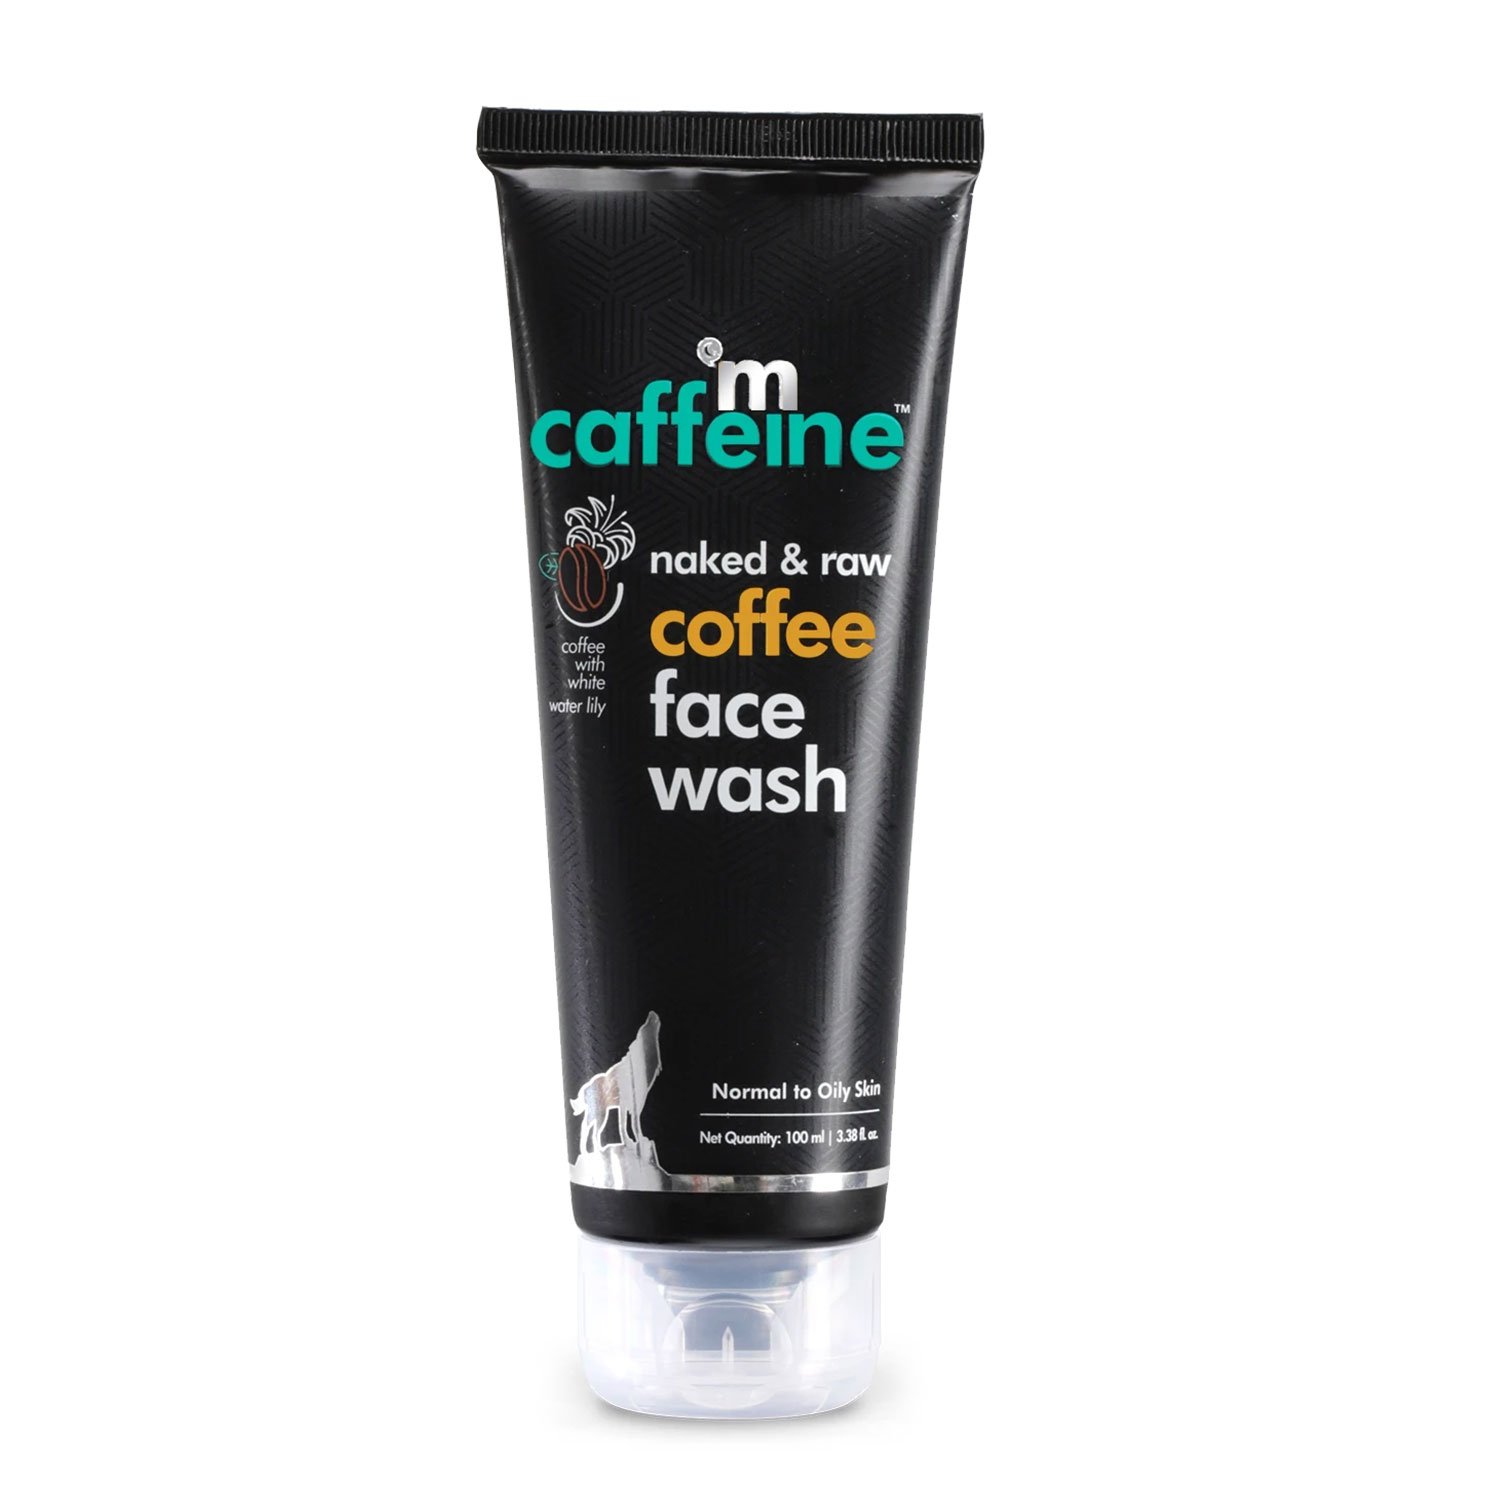 mCaffeine Coffee Face Wash for Fresh & Glowing Skin - Hydrating Face Cleanser for Oil & Dirt Removal, 100ml